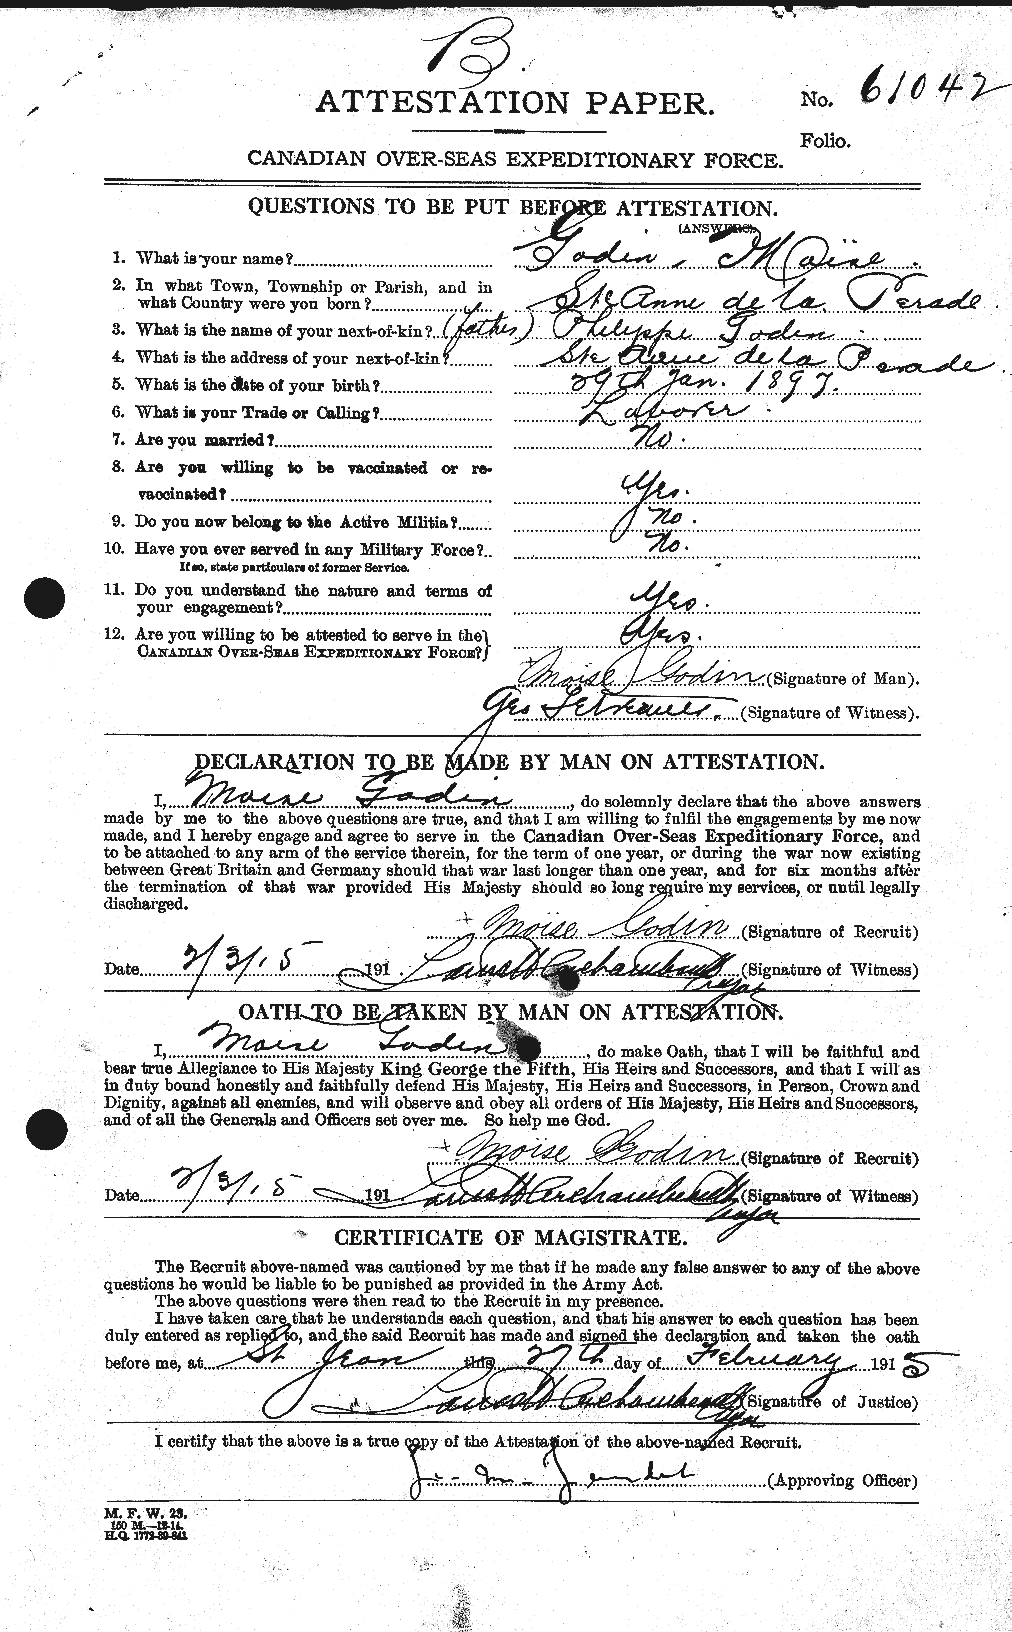 Personnel Records of the First World War - CEF 354555a